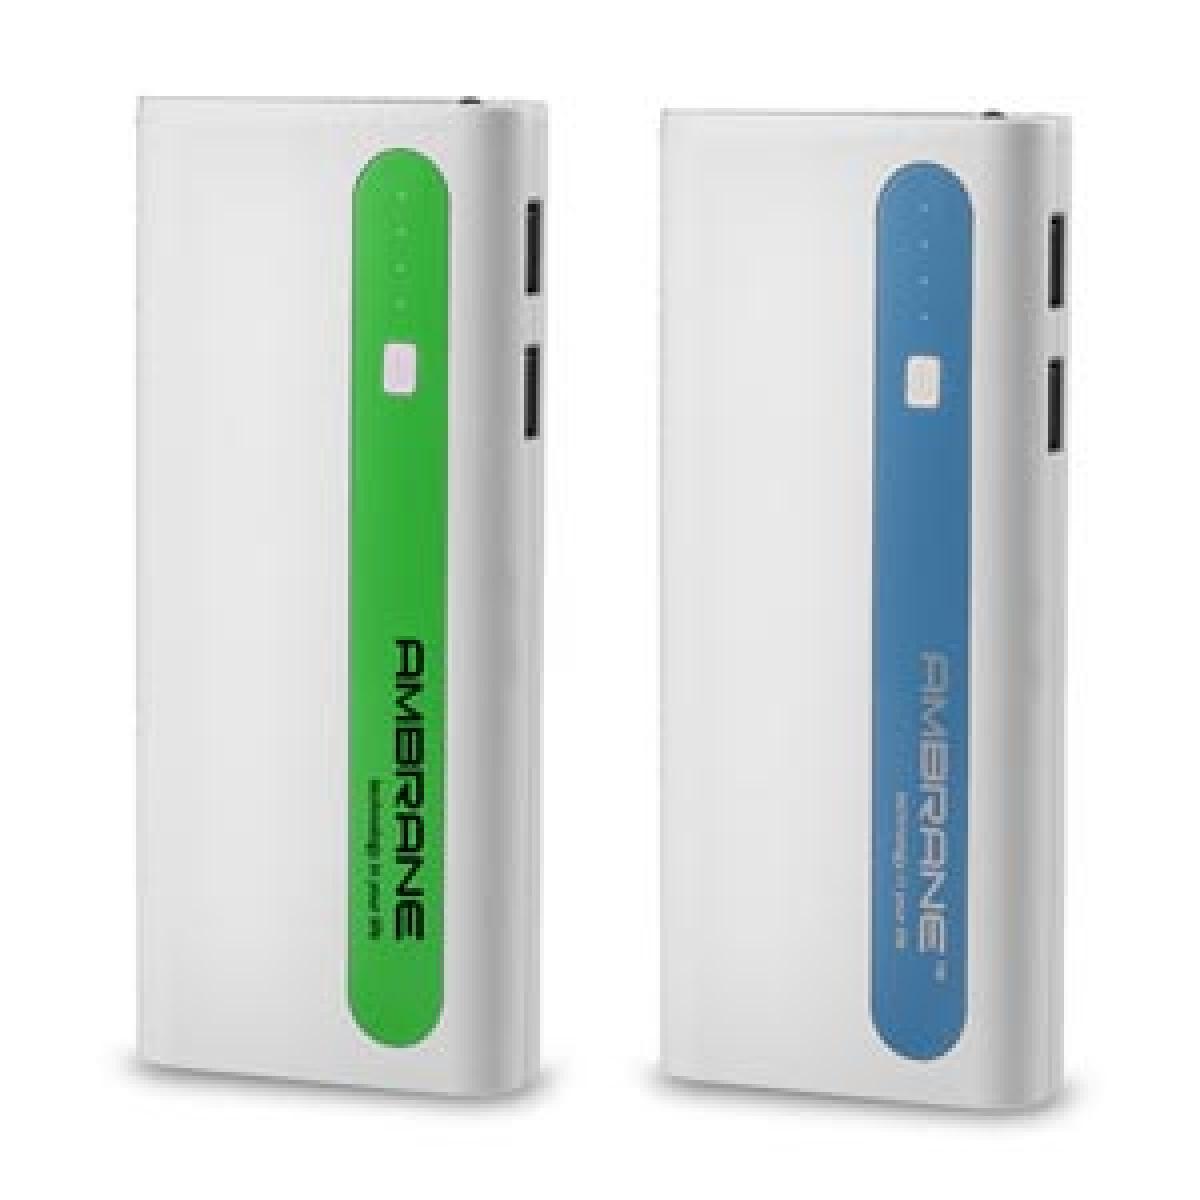 Ambrane India latest Power Bank for 949